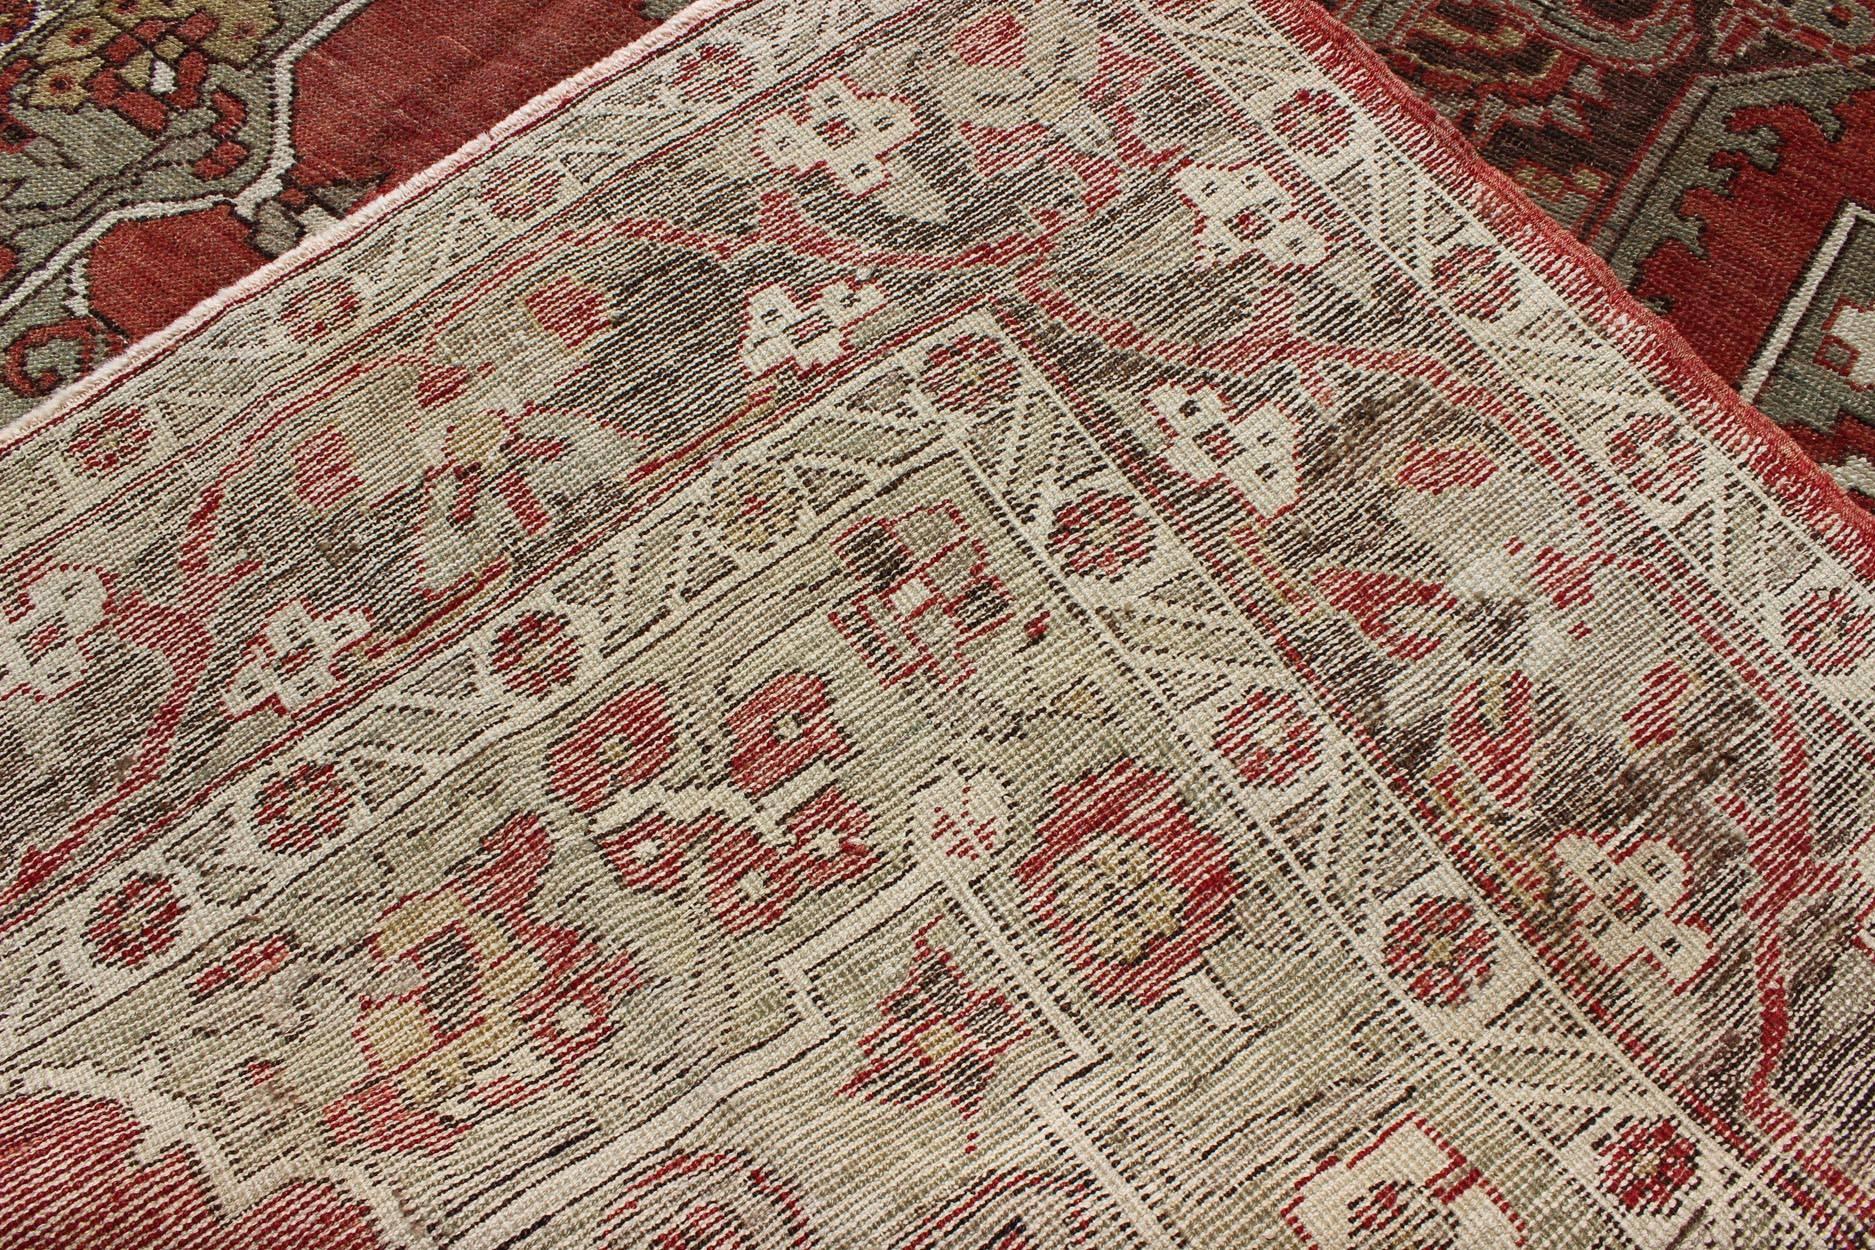 Antique Turkish Oushak Carpet with Medallion in Soft Red, Green and Brown  For Sale 2